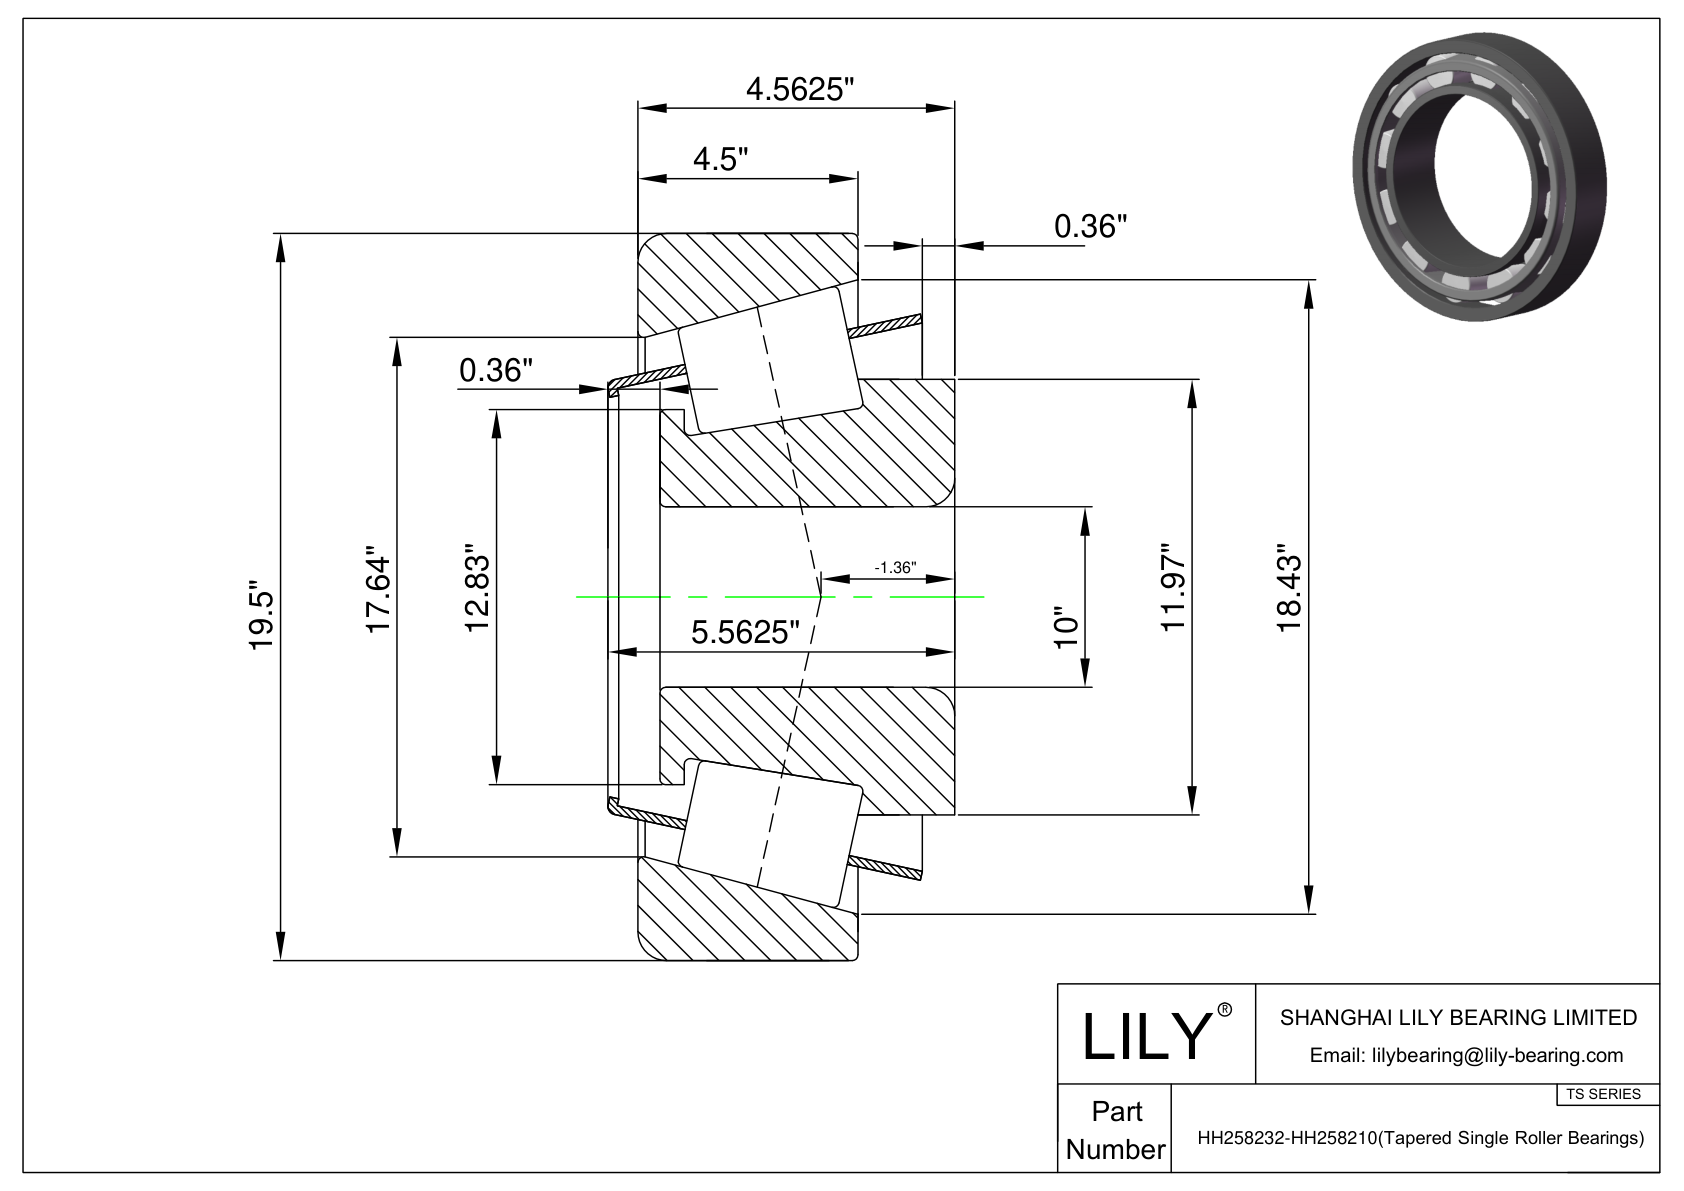 HH258232-HH258210 TS (Tapered Single Roller Bearings) (Imperial) cad drawing